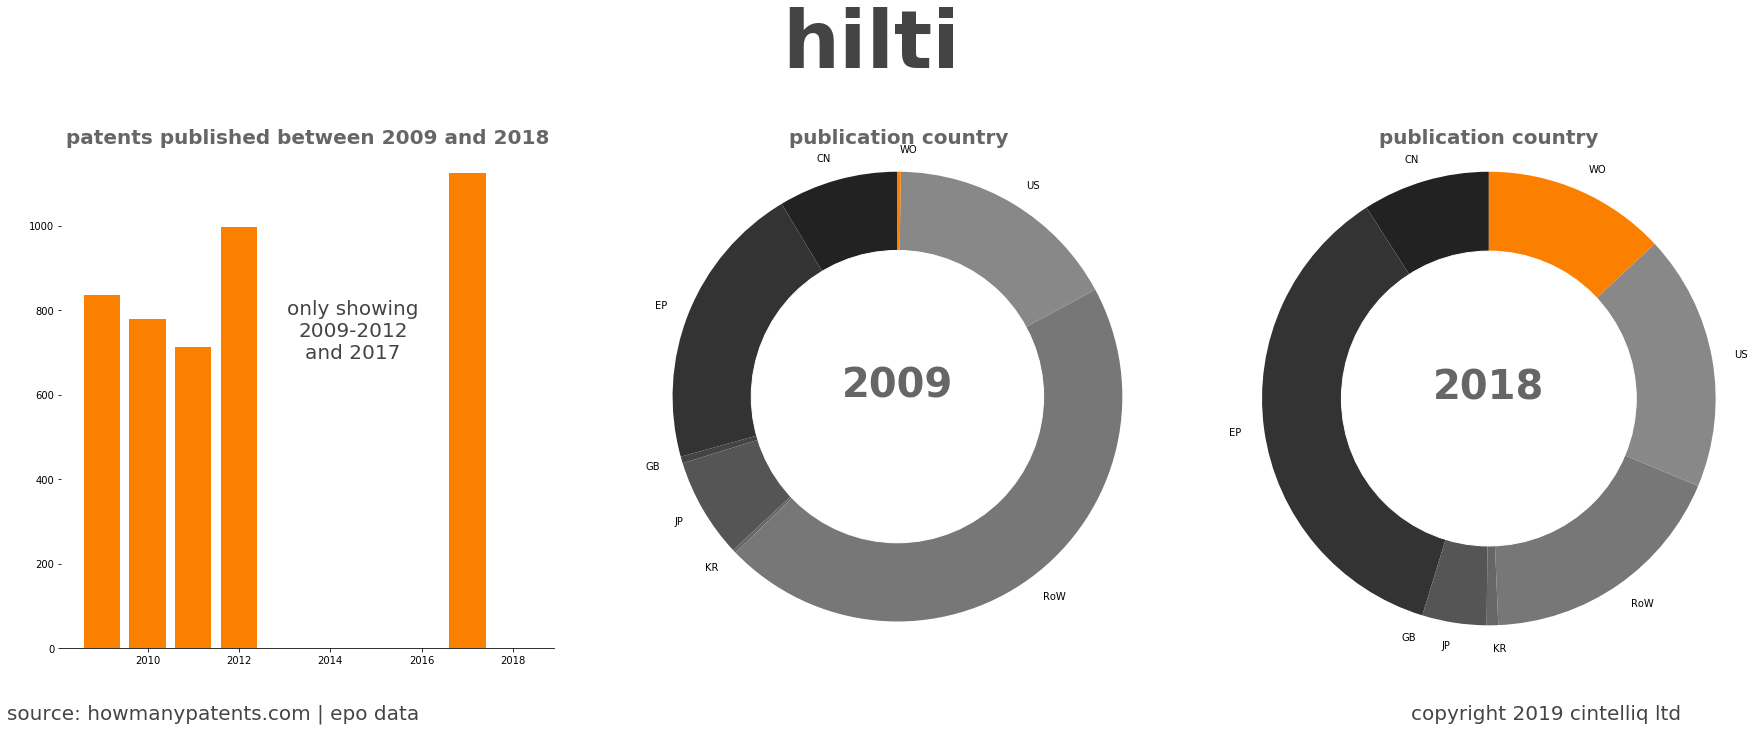 summary of patents for Hilti